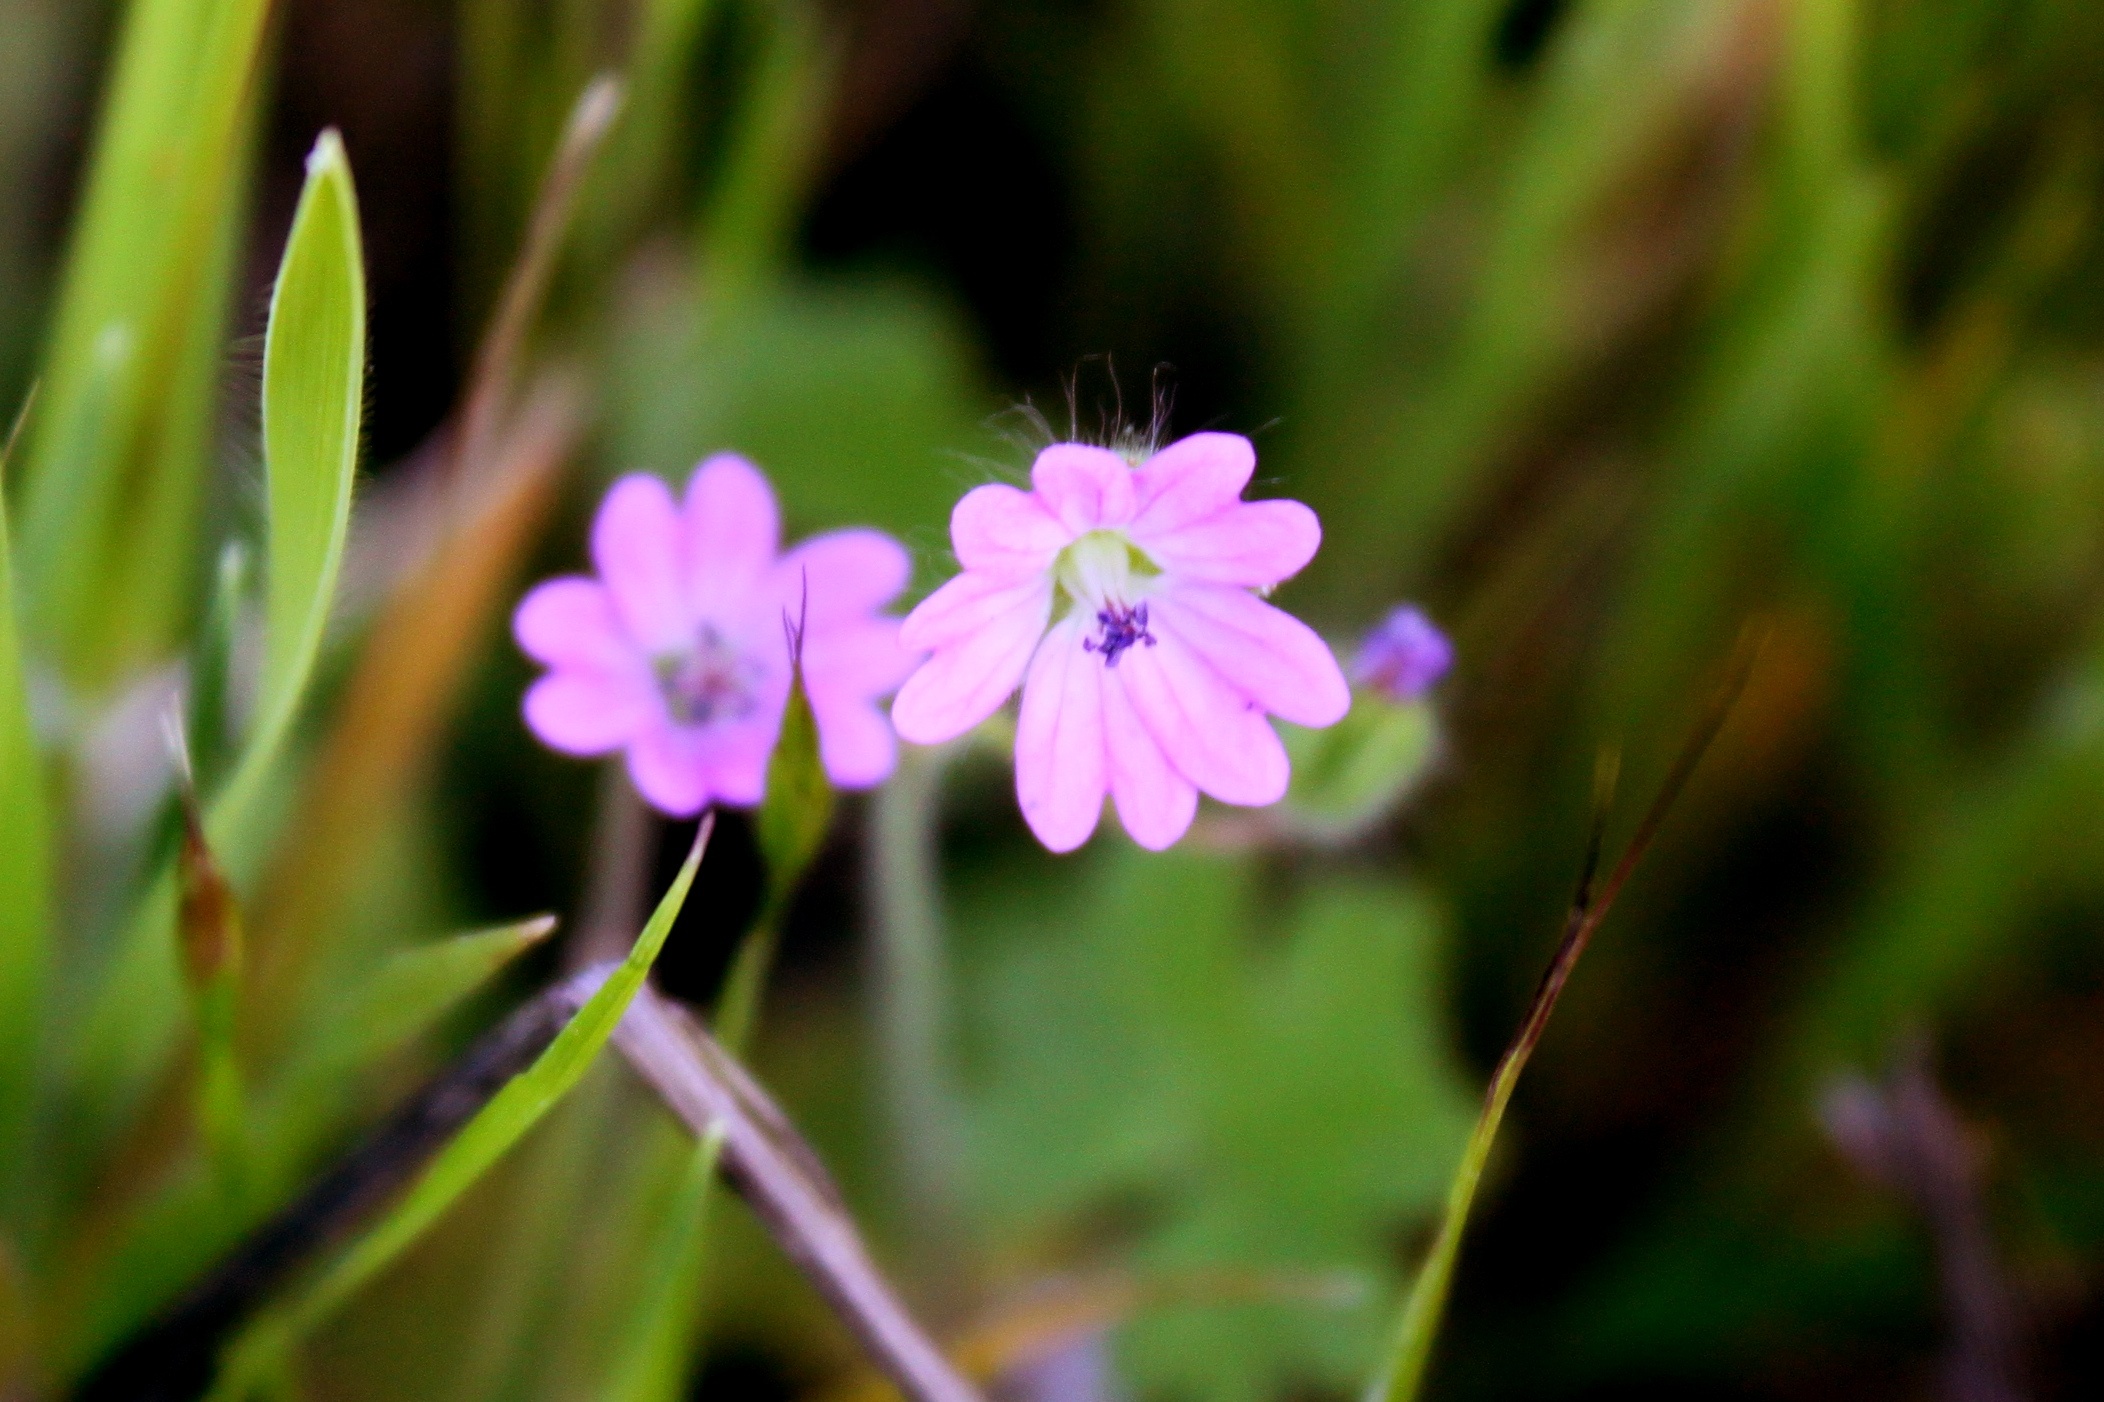 small pink flowers on the grassy field